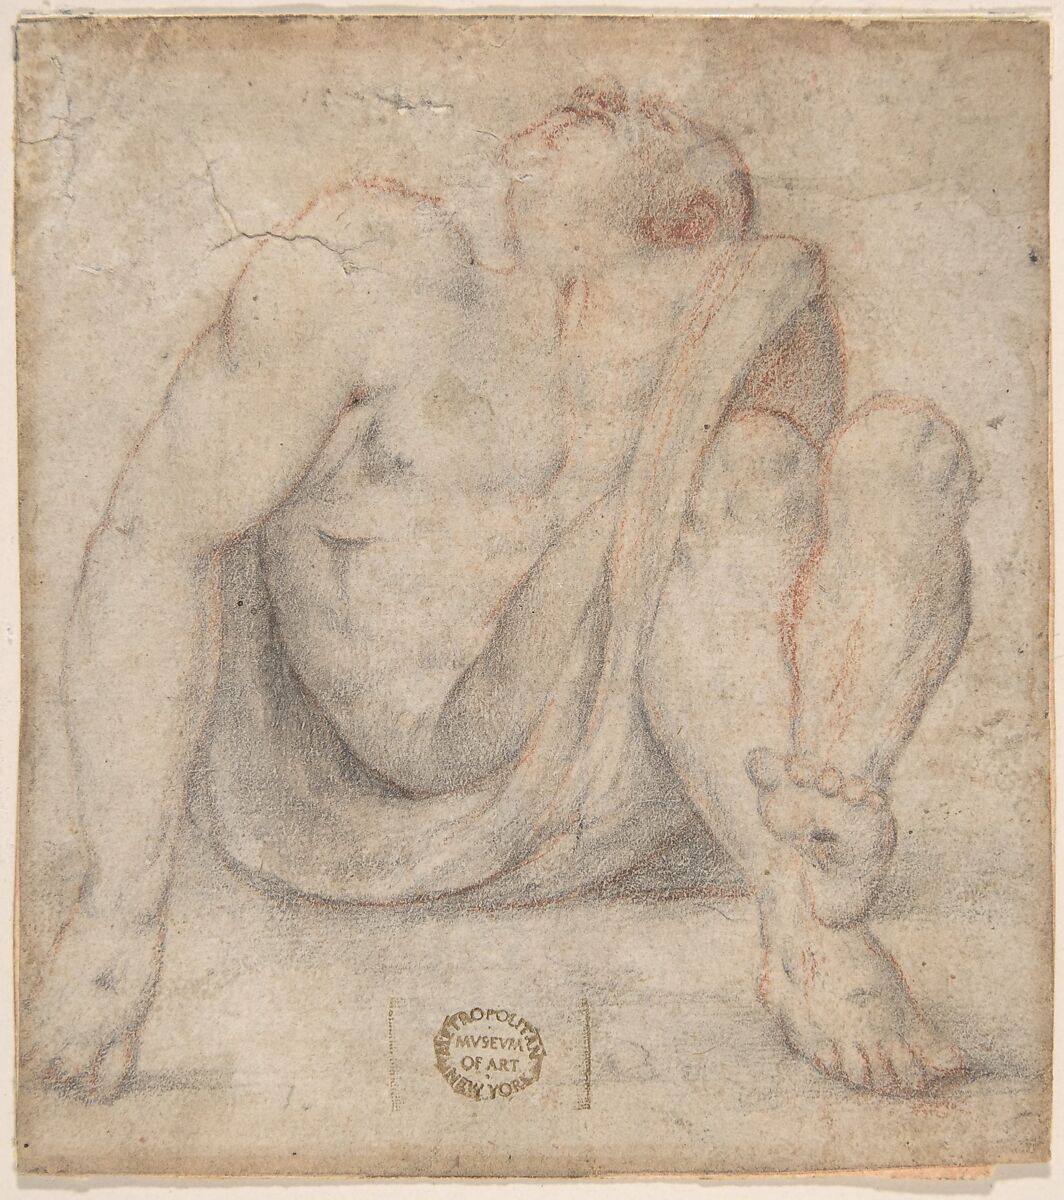 The Dead Christ, Anonymous, Italian, Roman-Bolognese, 17th century, Black and red chalk on light tan paper 